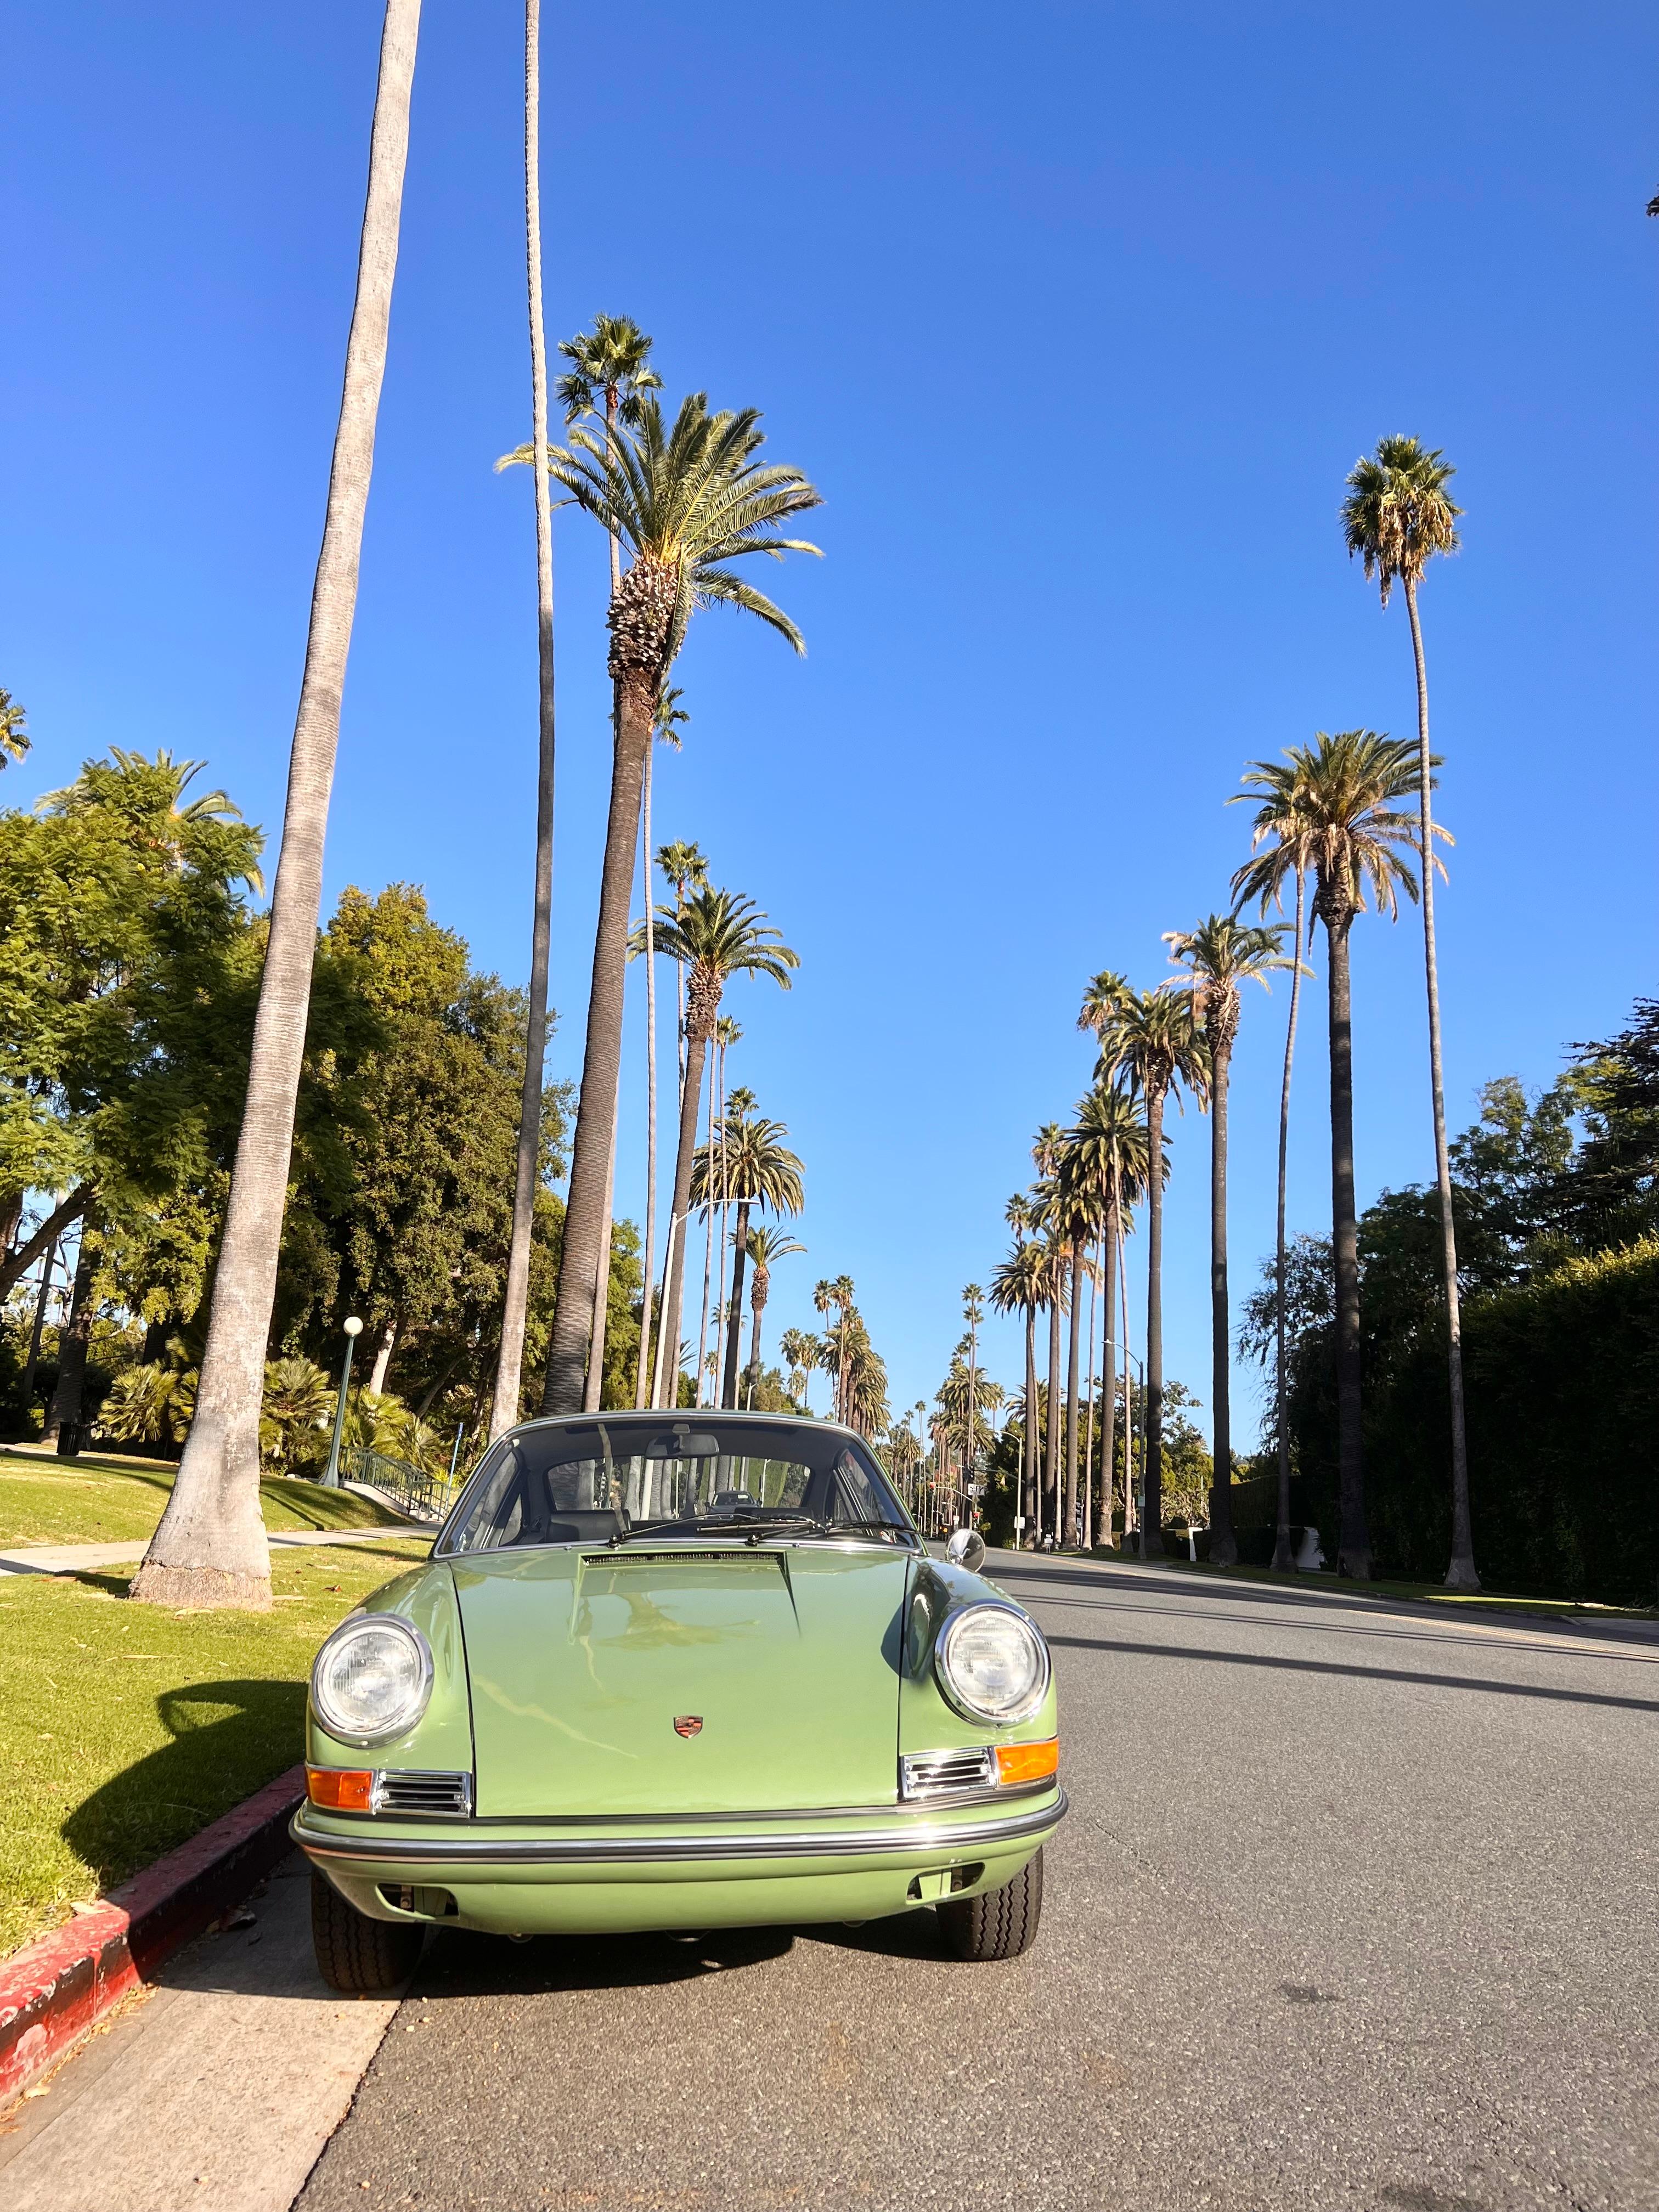 Wonderful 1968 Porsche 912 Hot Rod in leaf green with sunroof. Classic short wheel based Porsche that is just over 55 years old. 2.4 liter engine from a 1970 911 Porsche completely overhauled. Extreme power and torque. 5 speed original transmission.